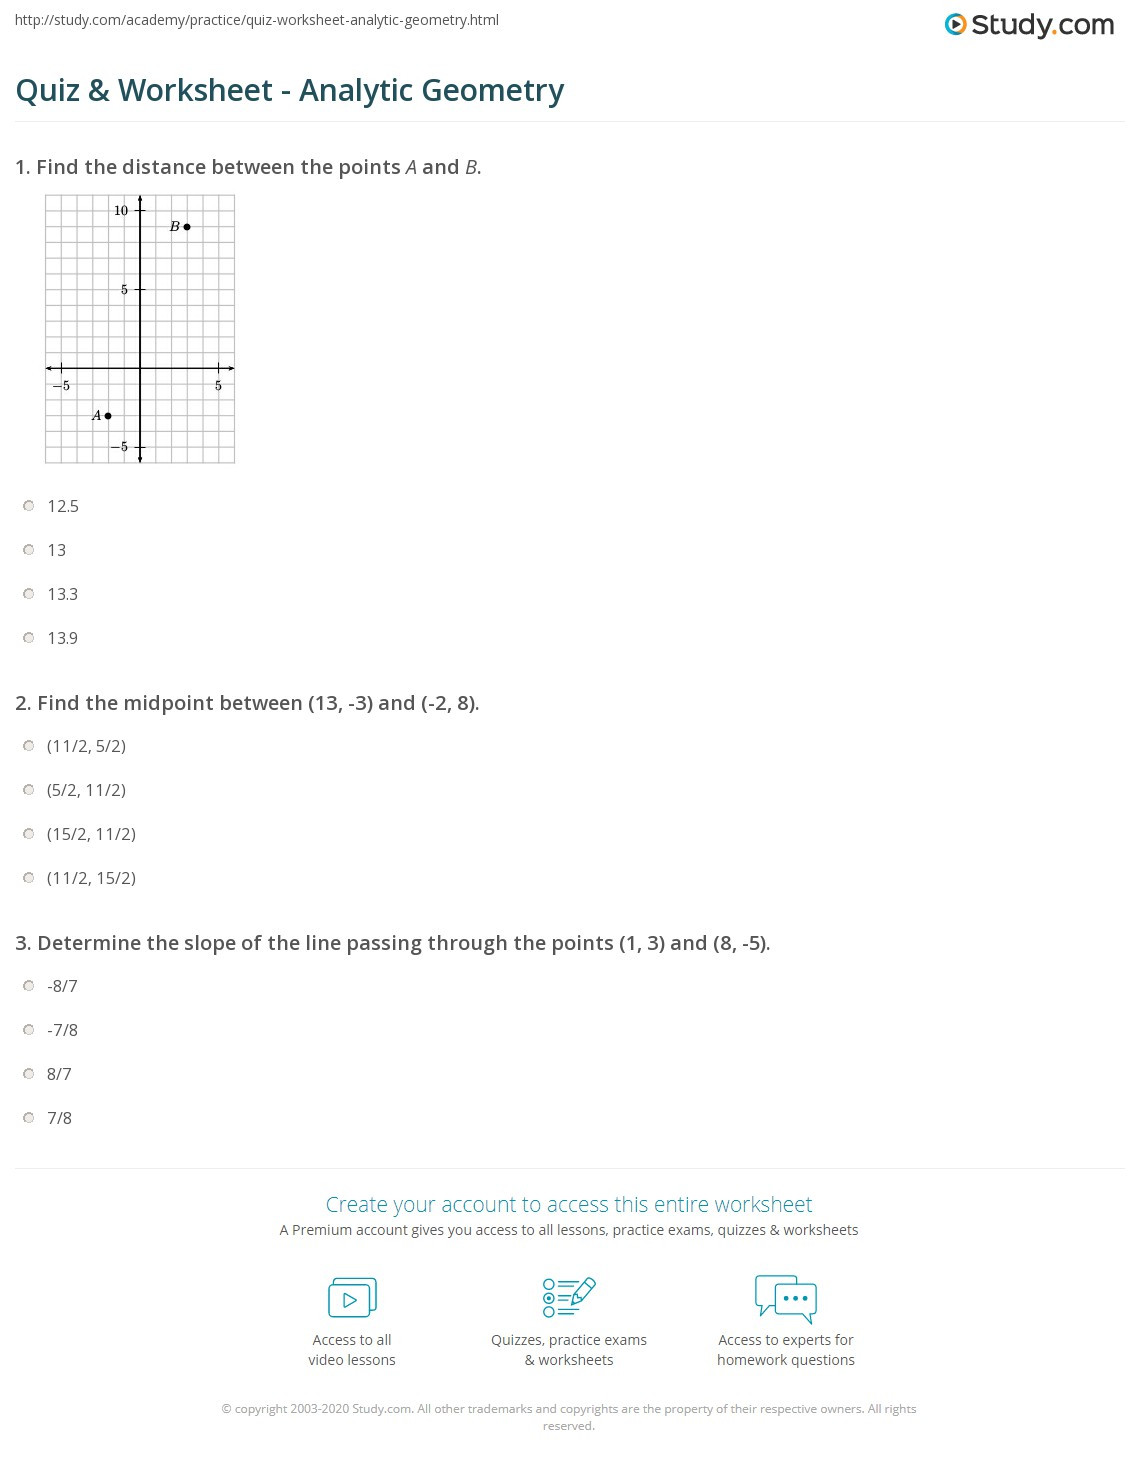 Midpoint and Distance Worksheet Quiz &amp; Worksheet Analytic Geometry